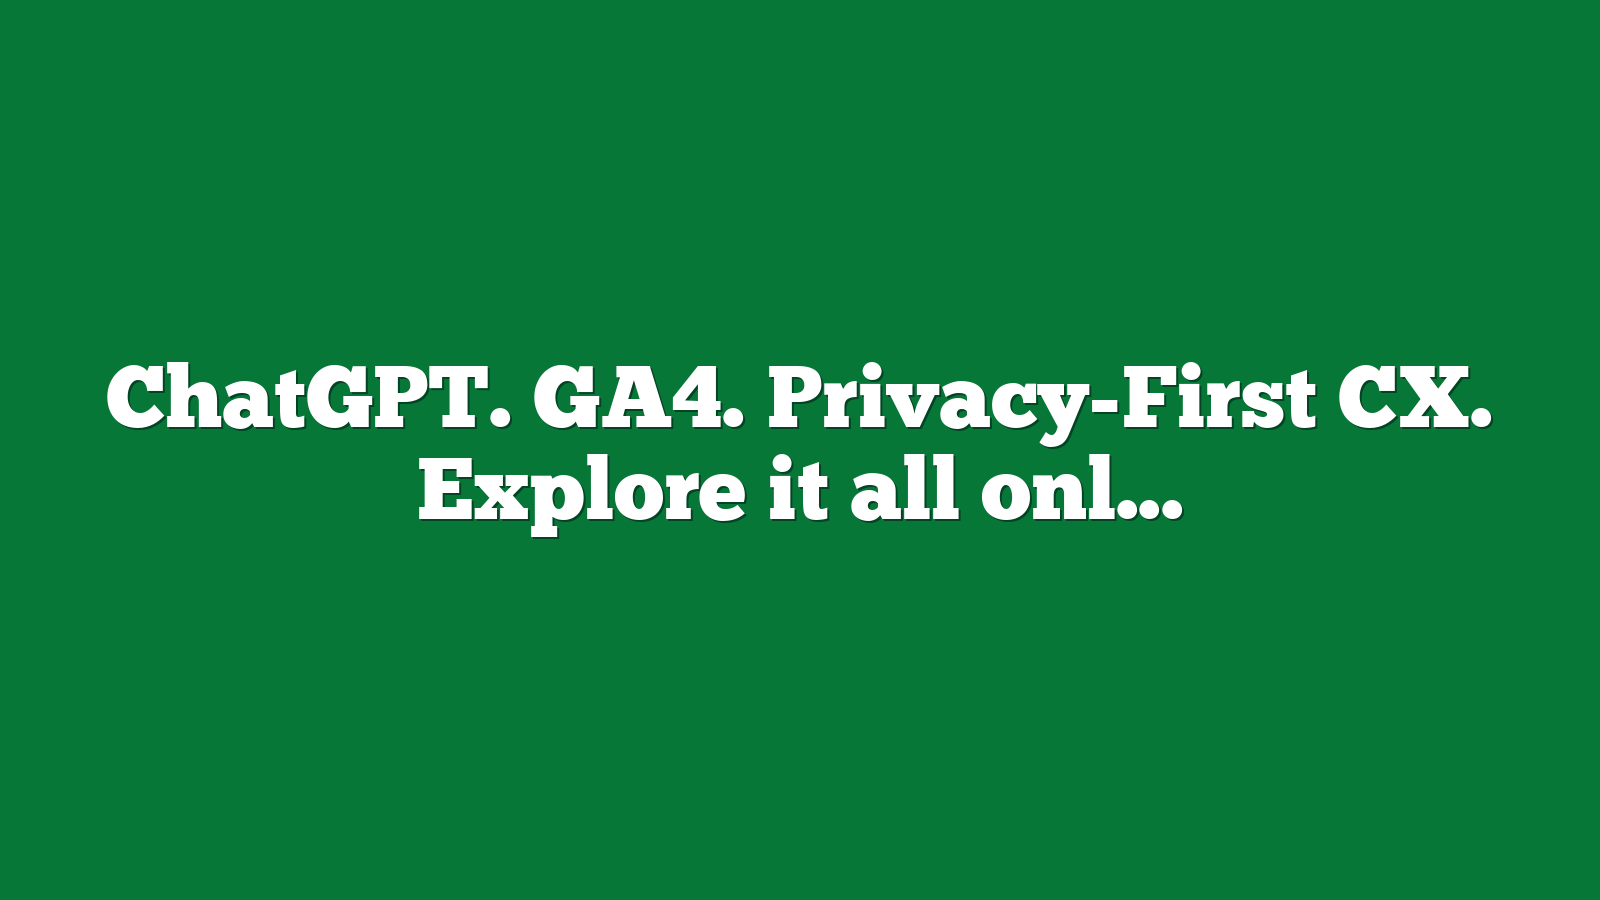 ChatGPT. GA4. Privacy-First CX. Explore it all online – next week – for free! by Cynthia Ramsaran